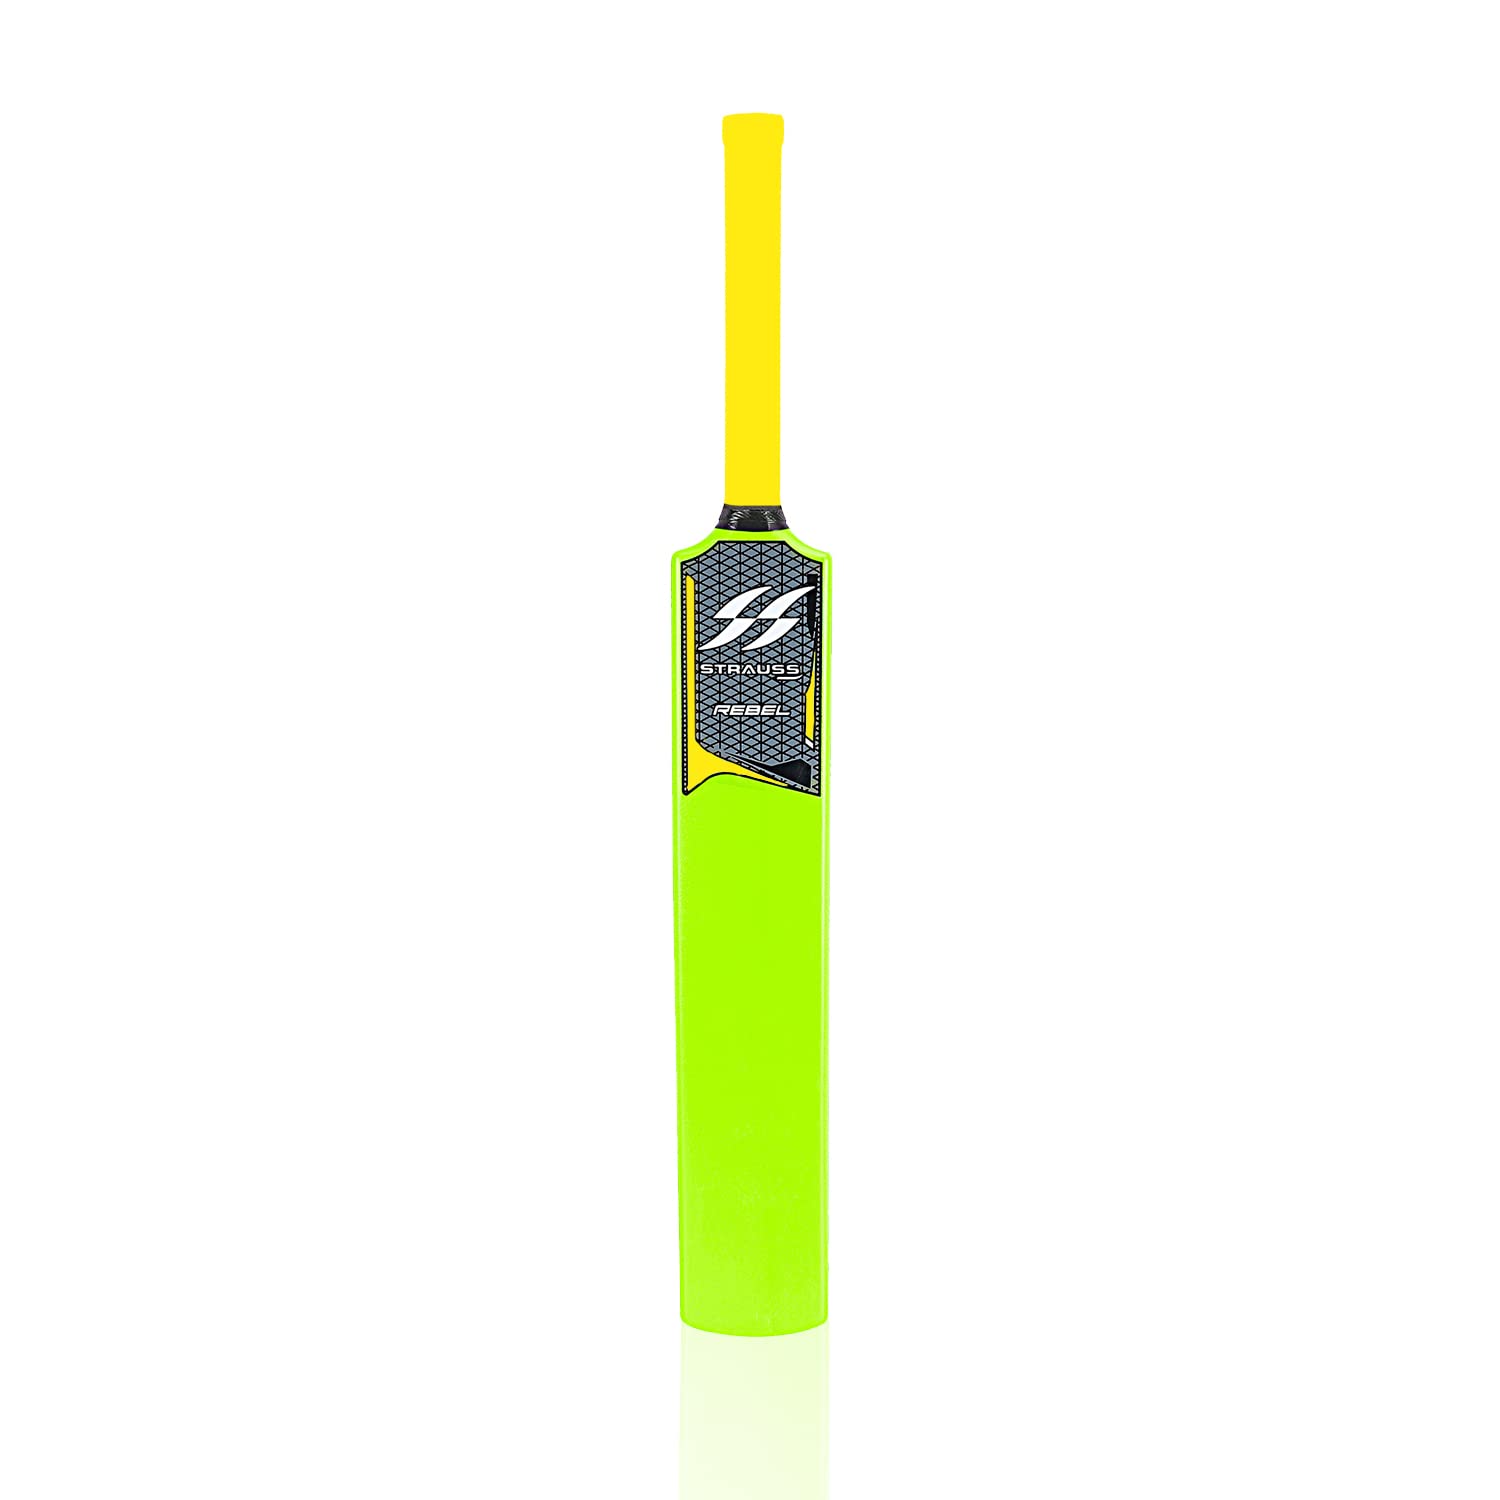 Strauss Rebel Plastic Cricket Bat (34'' X 4.5'' inch), for All Age Group (Fluorescent Yellow)